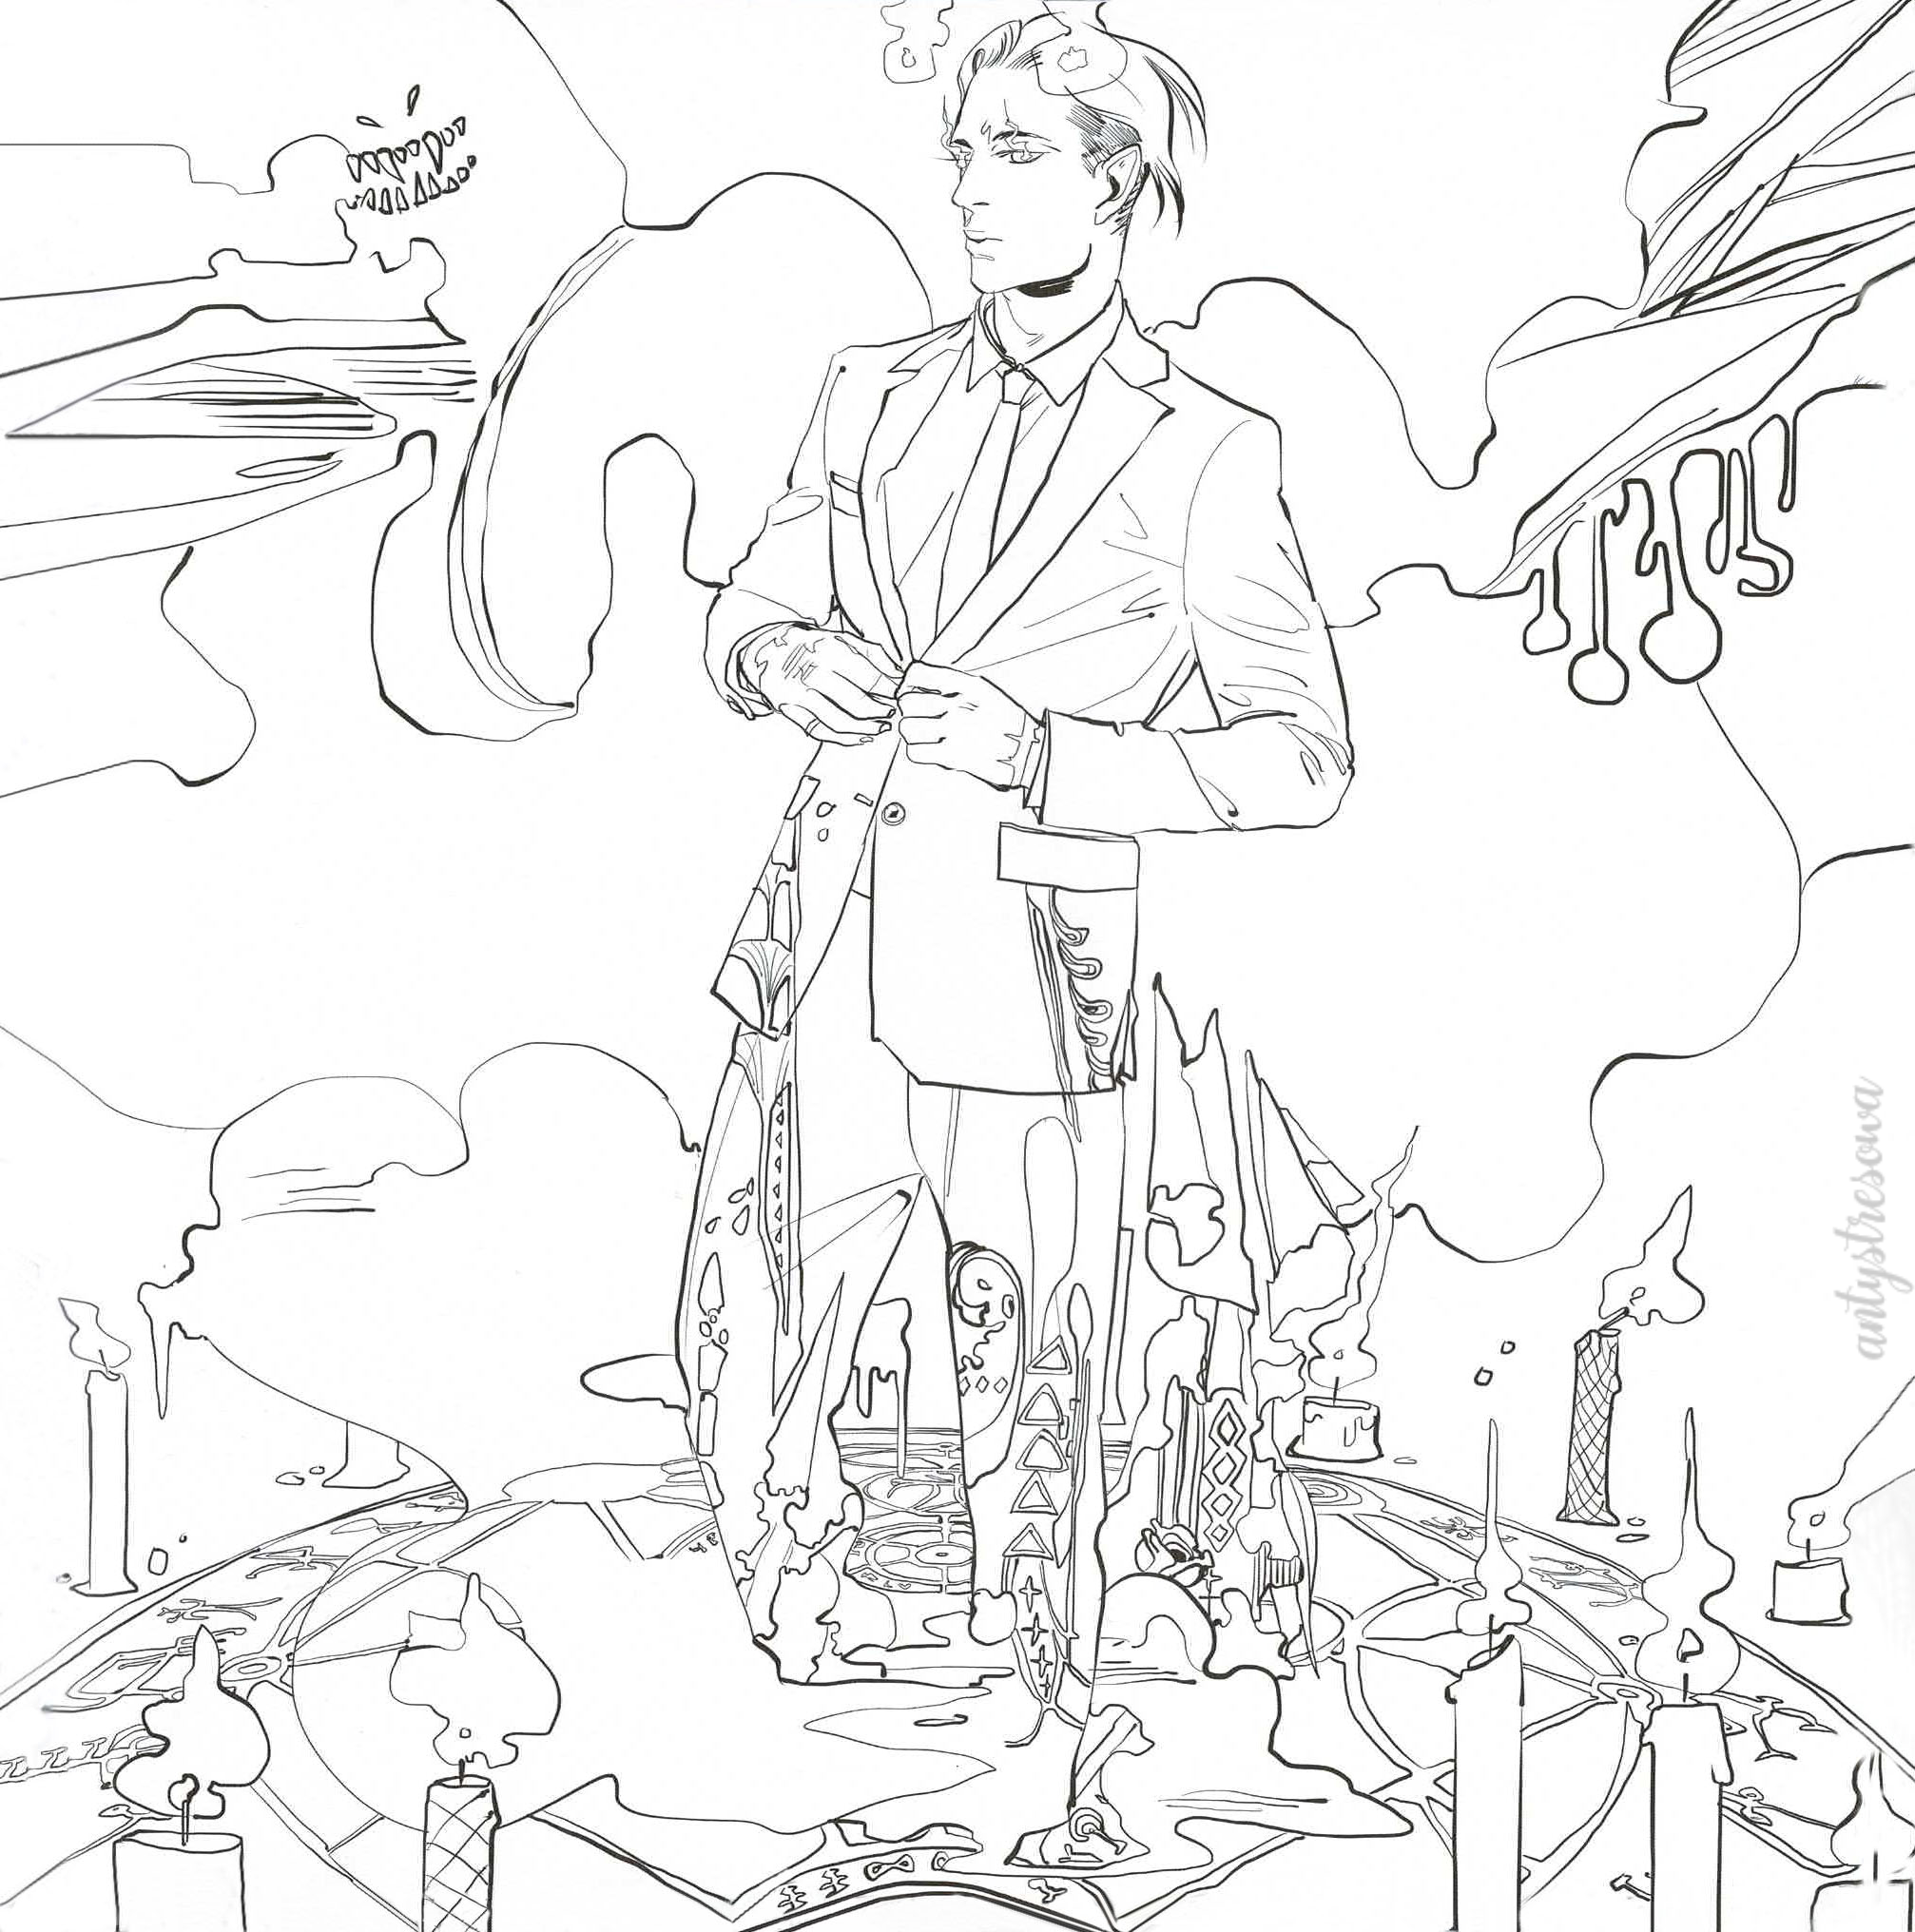 The official Mortal instruments Colouring Book - Cassandra Clare & Cassandra Jean. Asmodeusz.